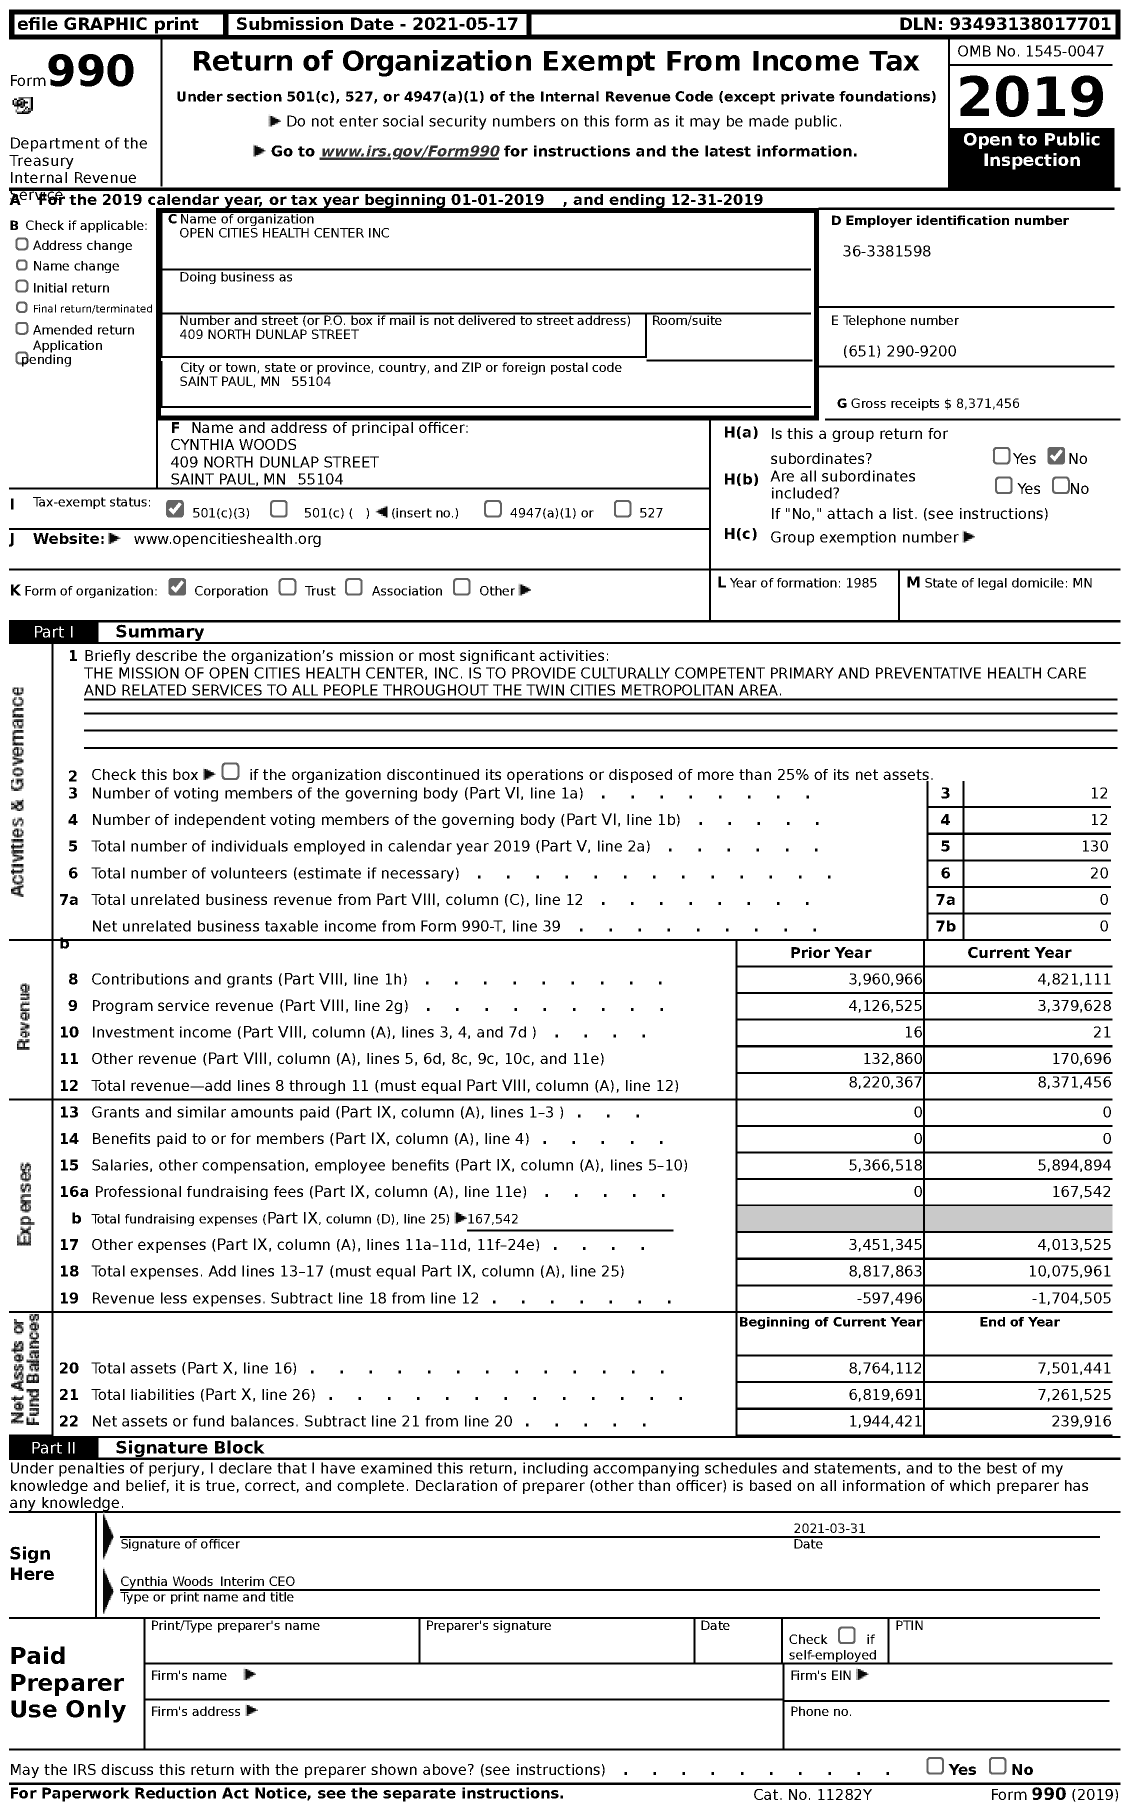 Image of first page of 2019 Form 990 for Open Cities Health Center (OCHC)